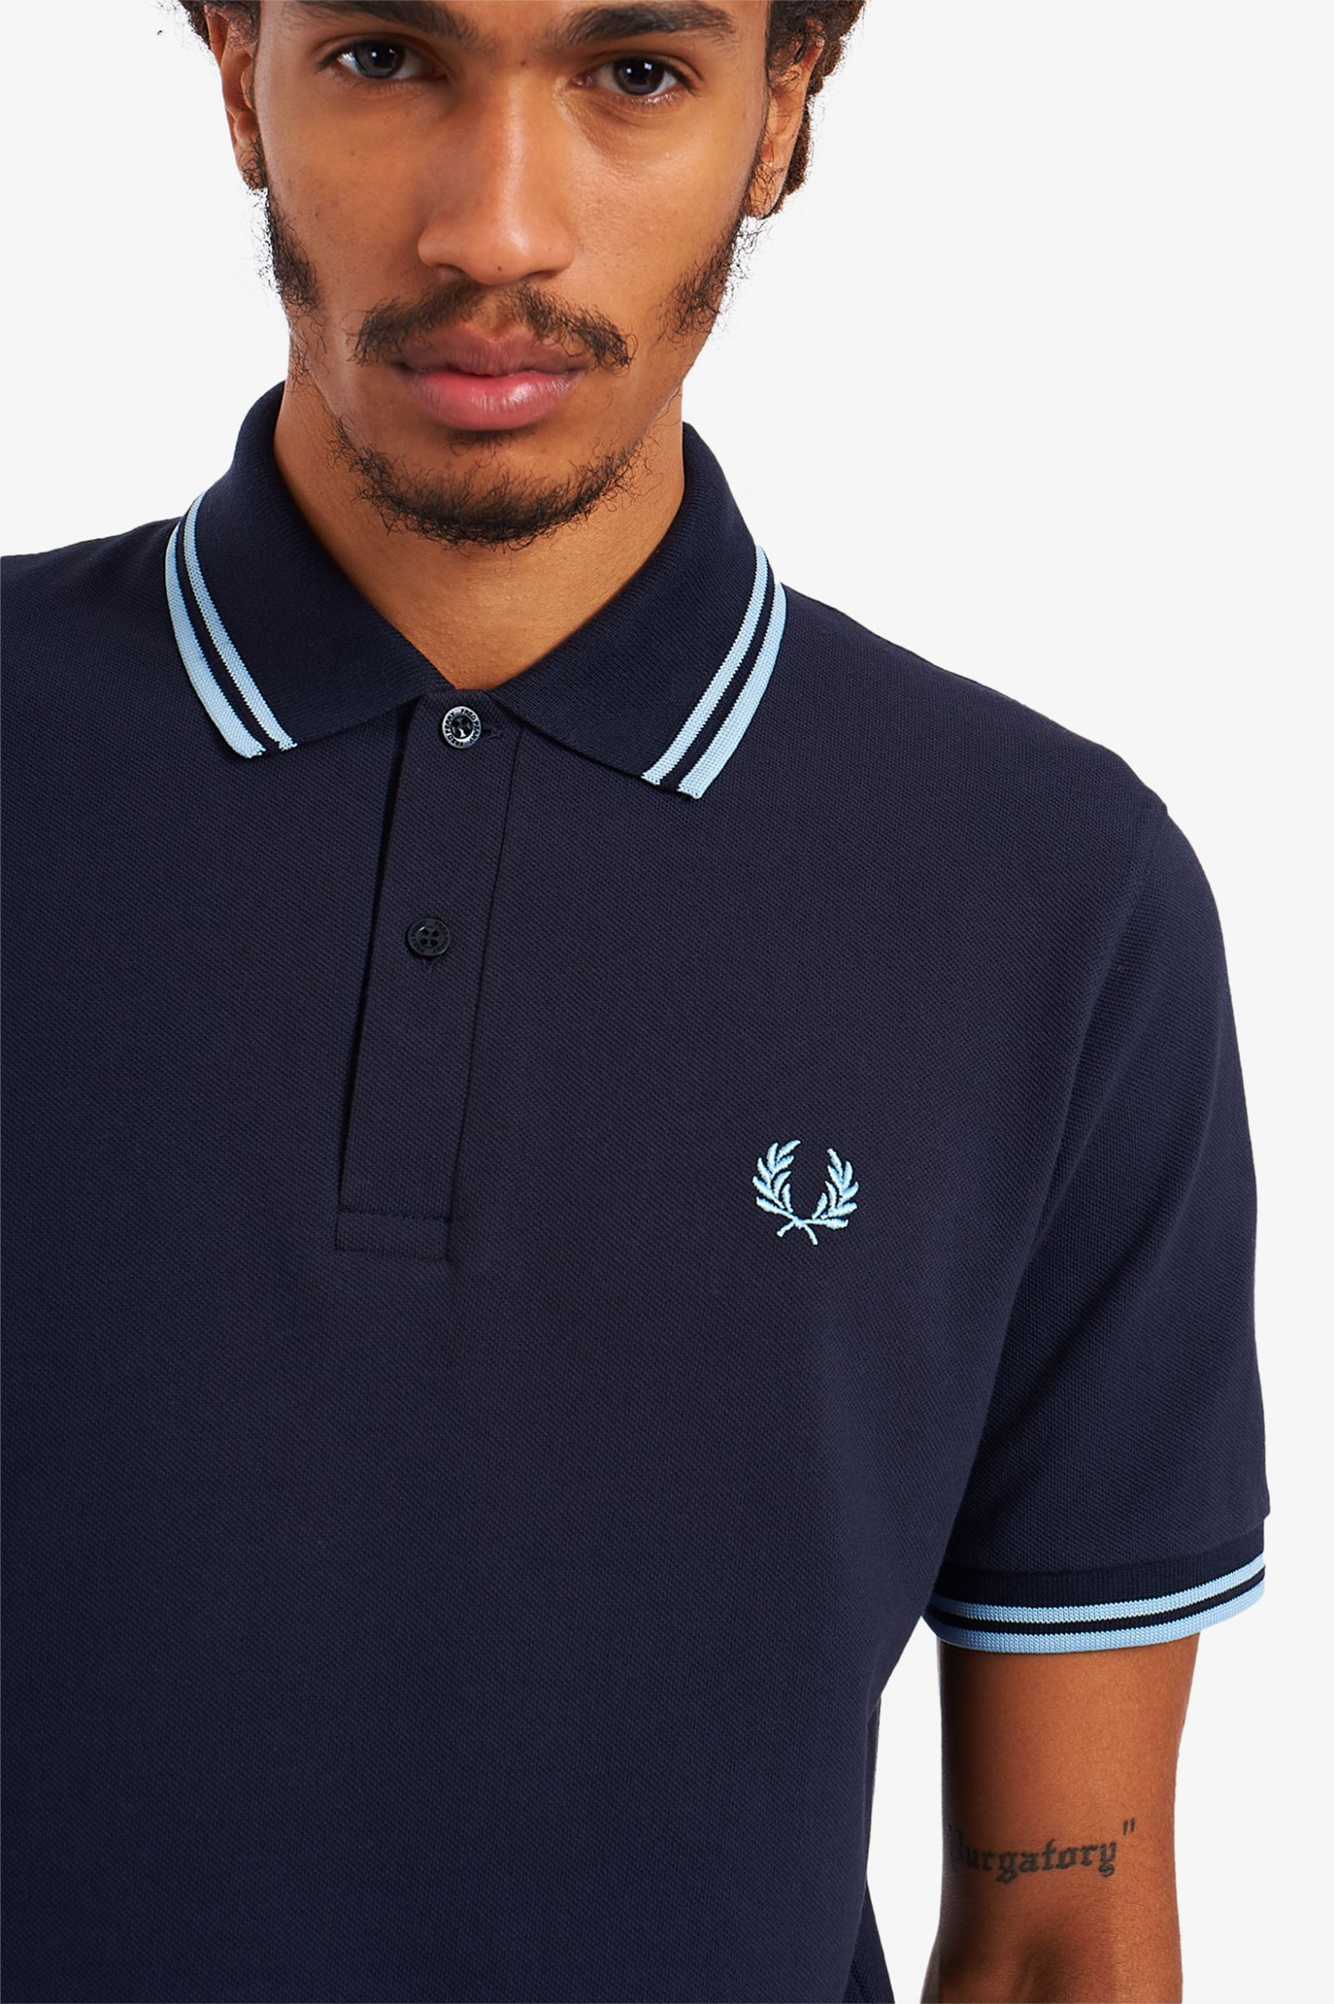 FRED PERRY TWIN TIPPED POLO SHIRT NAVY/ICE/ICE